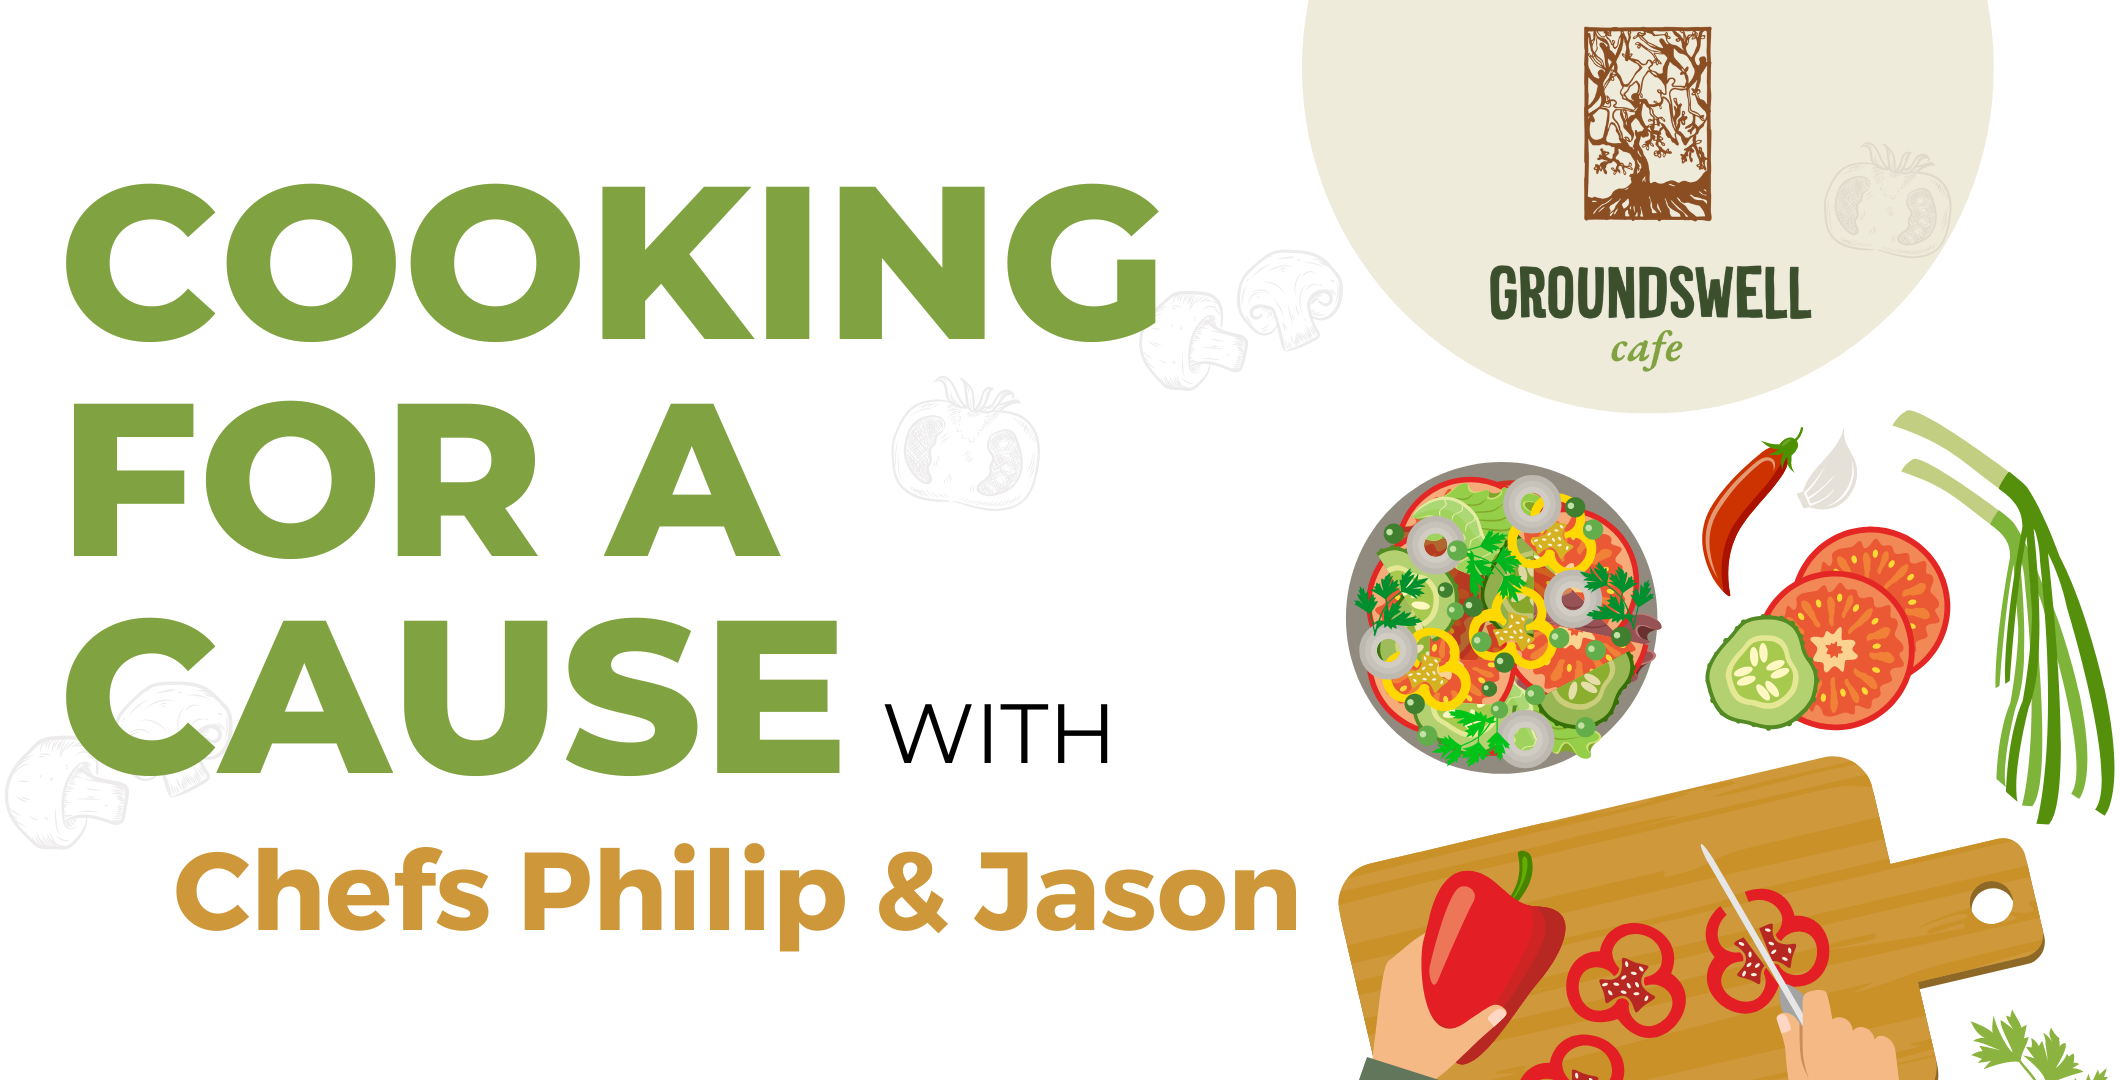 Cooking for a Cause banner image with Groundswell Cafe logo